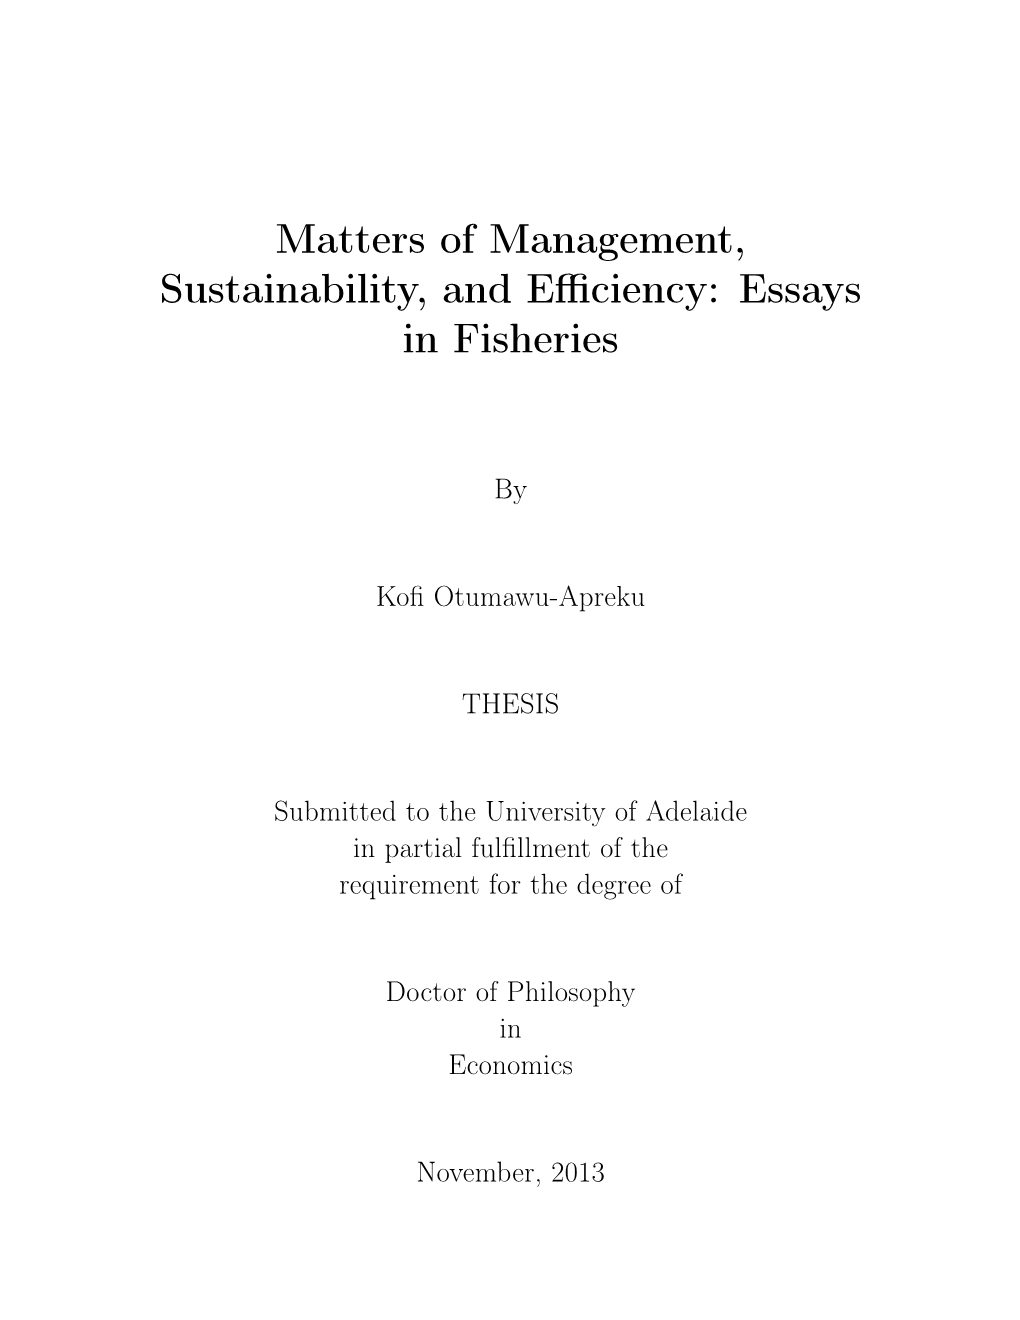 Matters of Management, Sustainability, and Efficiency: Essays in Fisheries